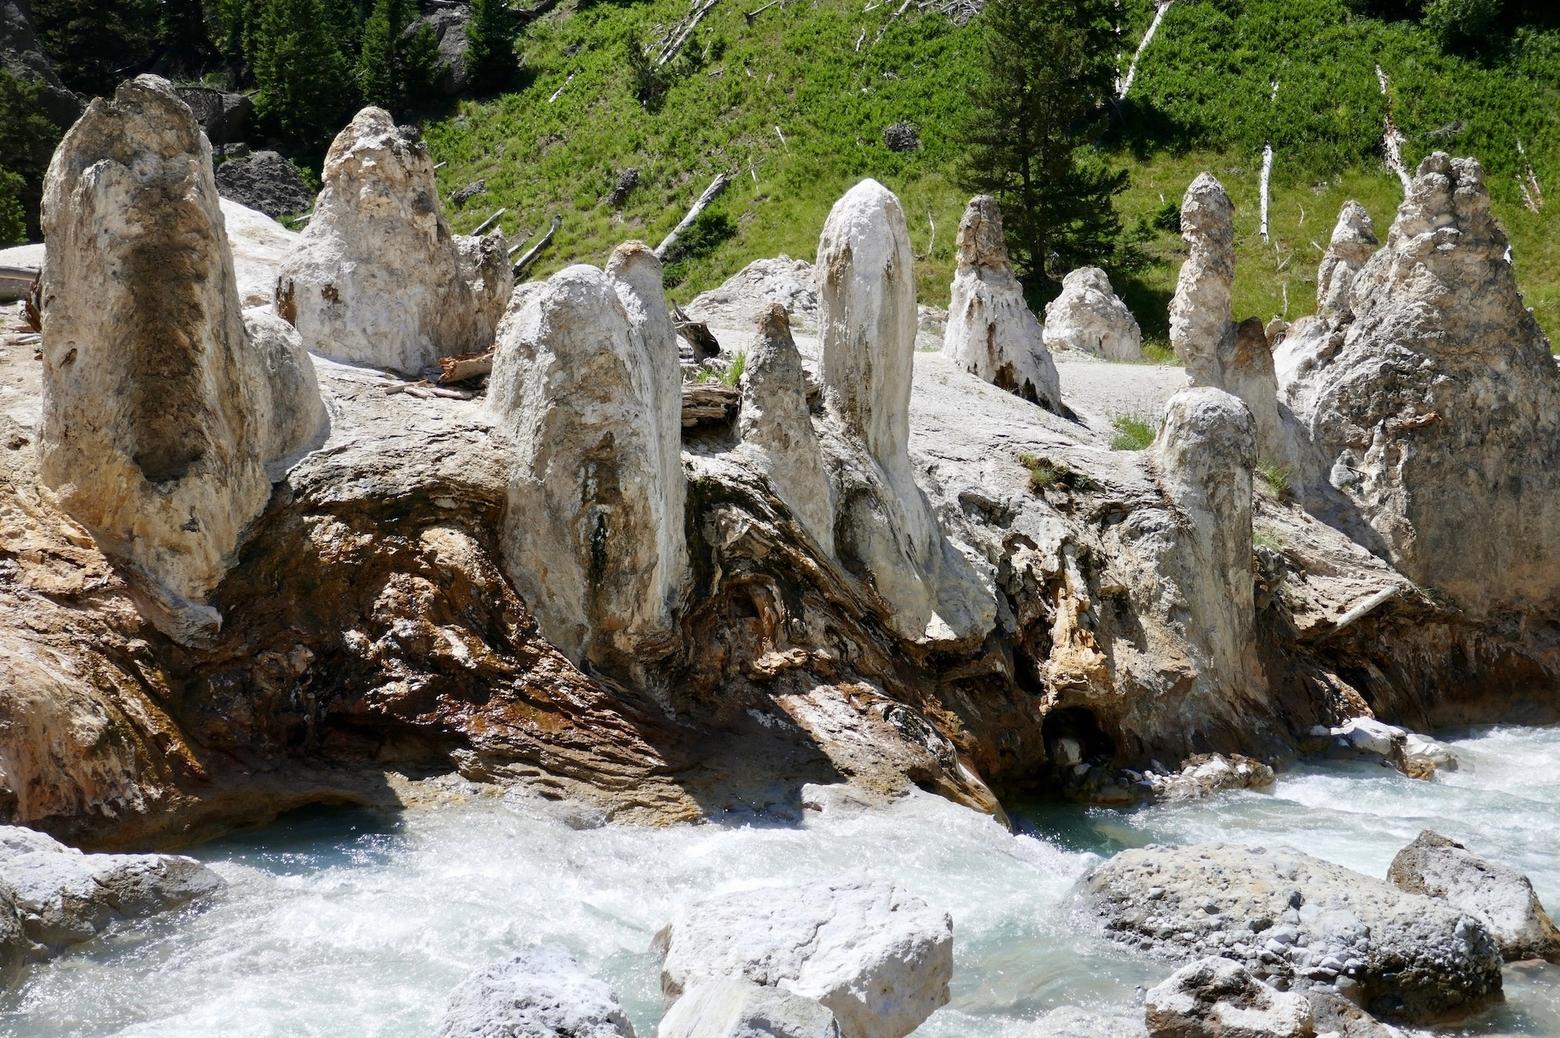 The "Totem Forest," now called Fairyland Basin, was so named for the travertine rock pillars that stand guard at the confluence of Broad and Shallow creeks in Yellowstone National Park. Photo by Todd Burritt